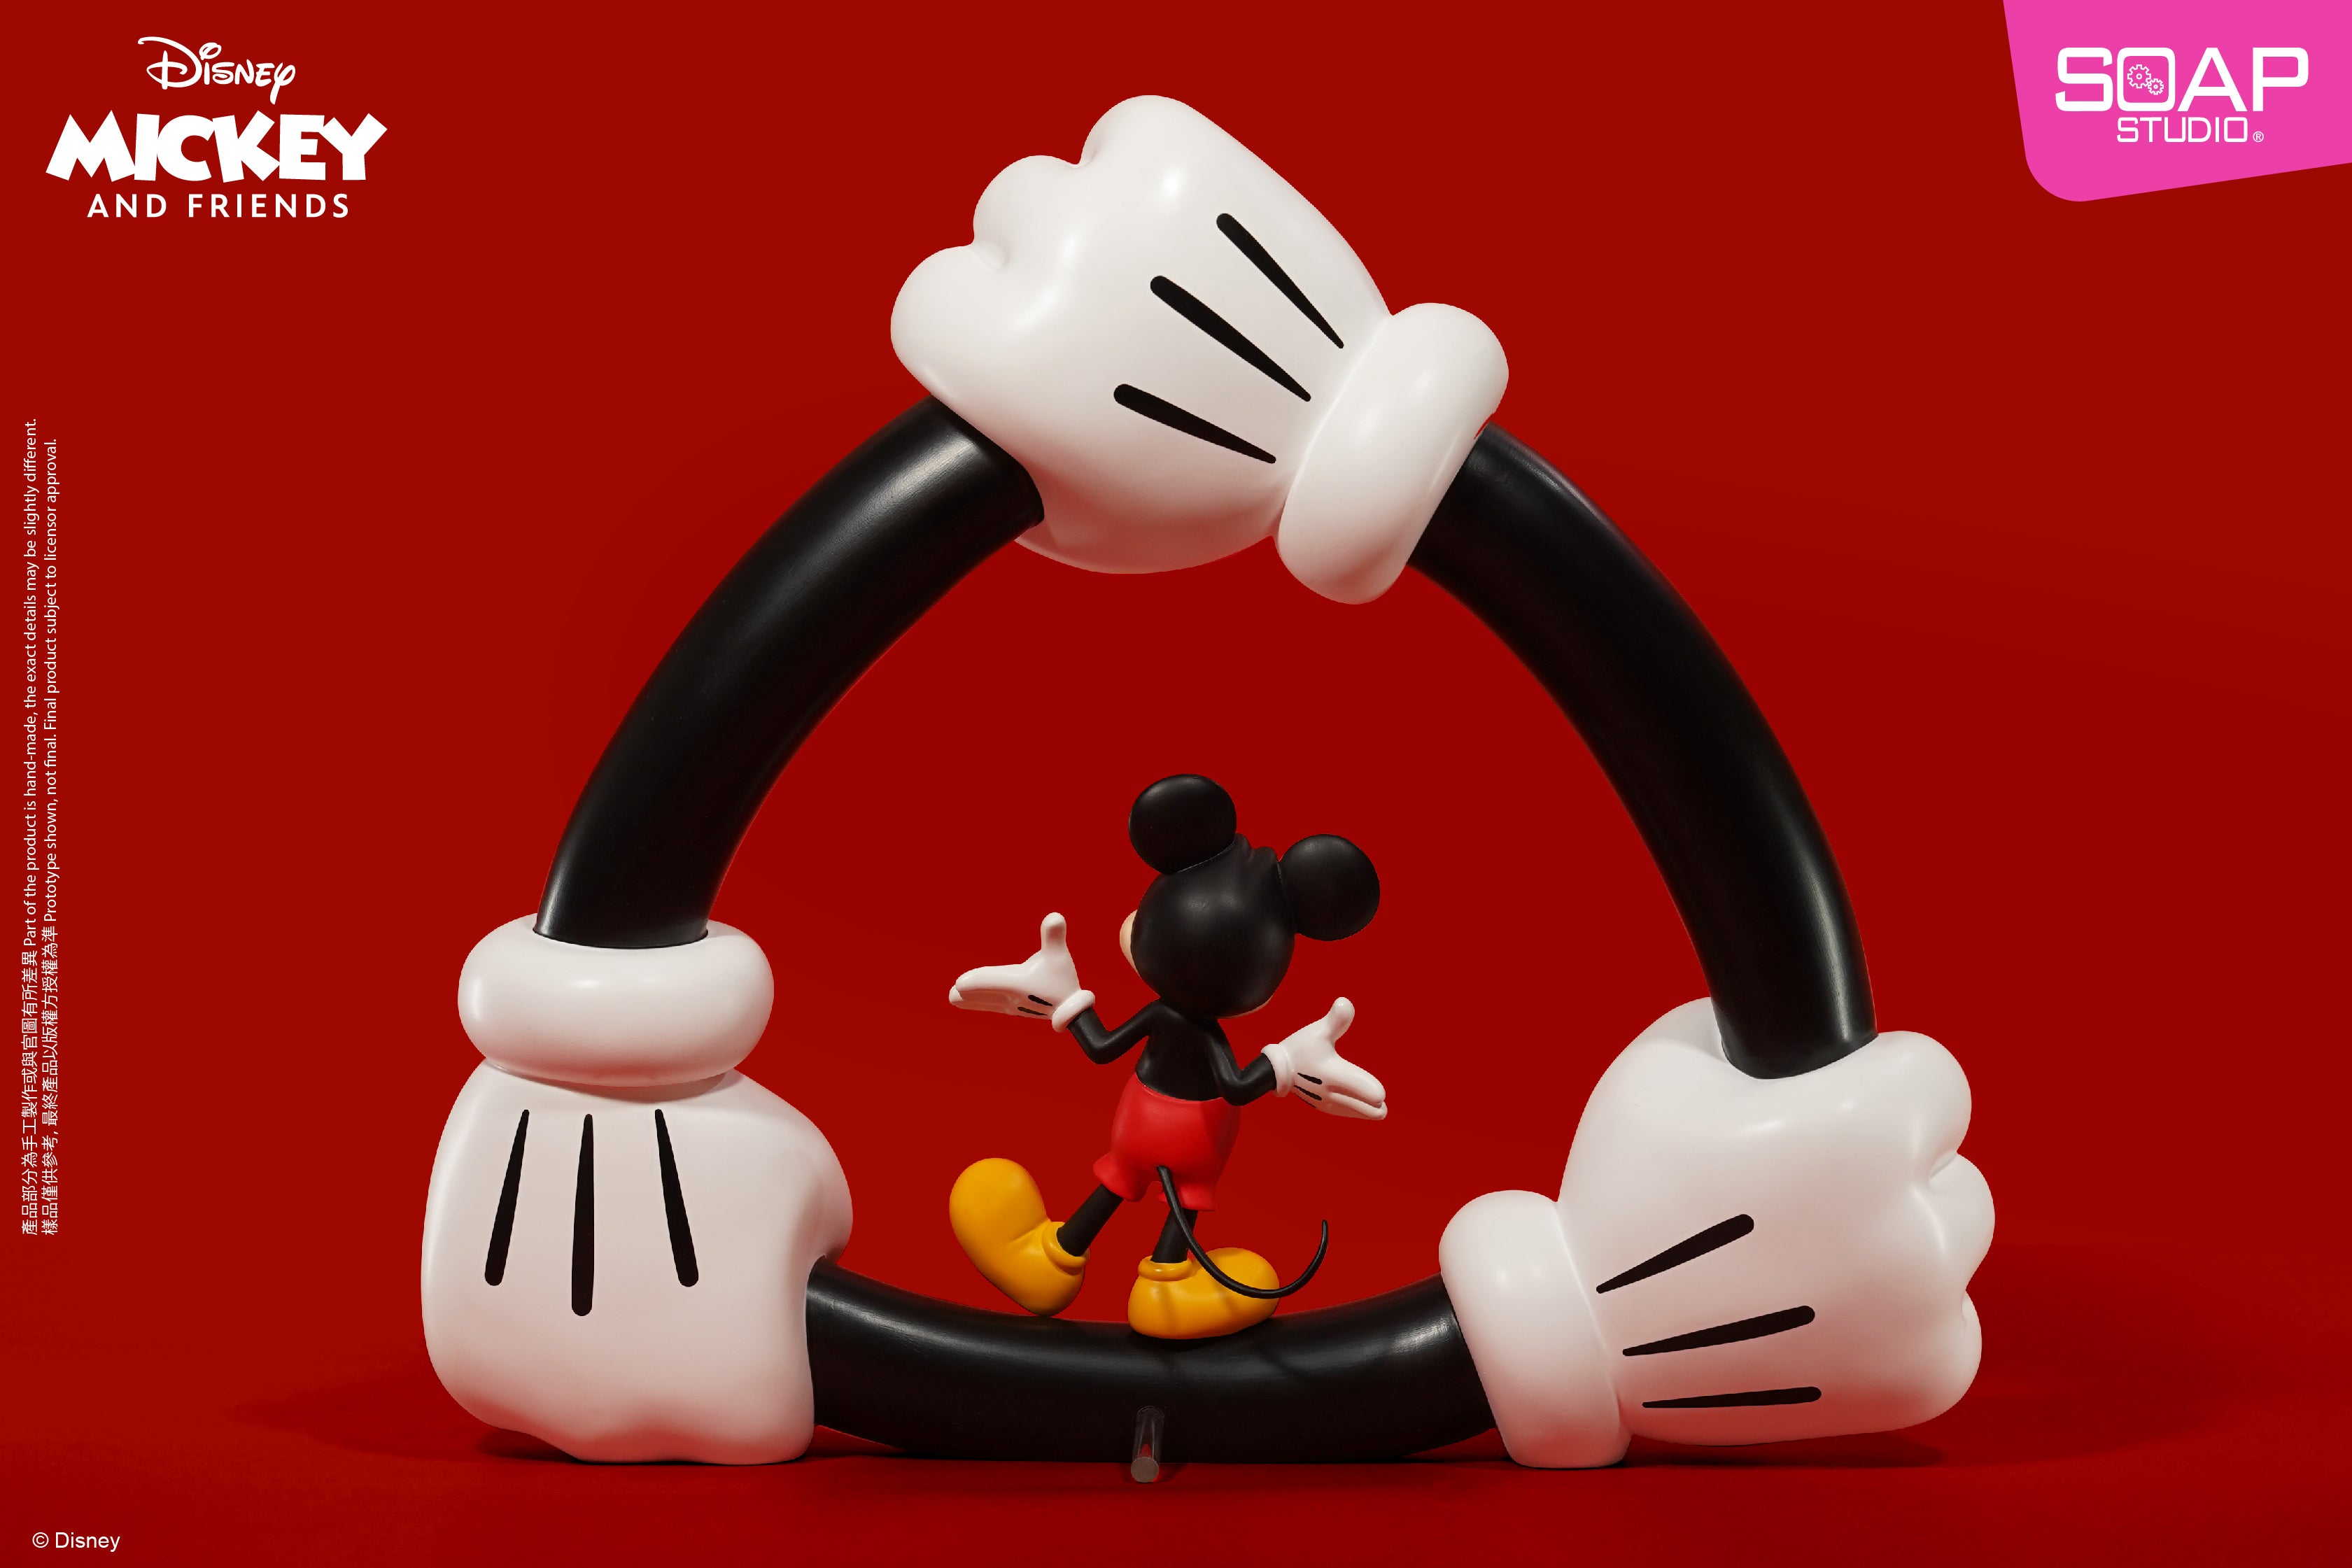 Soap Studio DY033 Disney Mickey Mouse Hand In Hand Statue